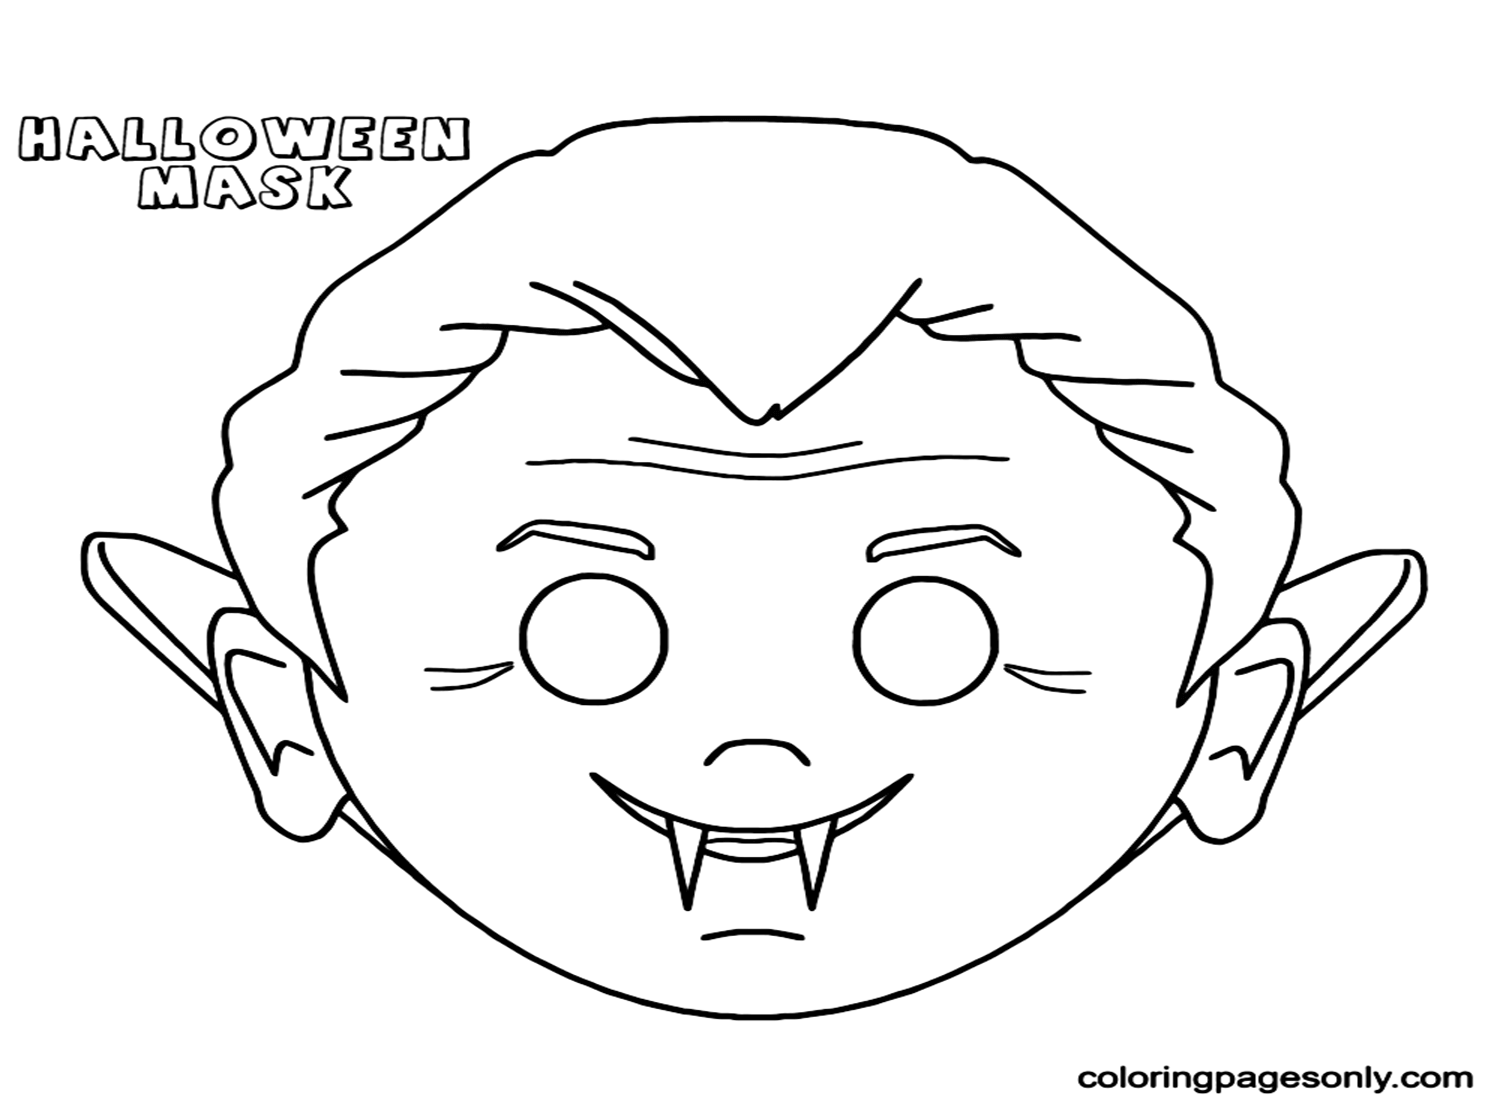 Halloween Mask Free Printable Coloring Pages